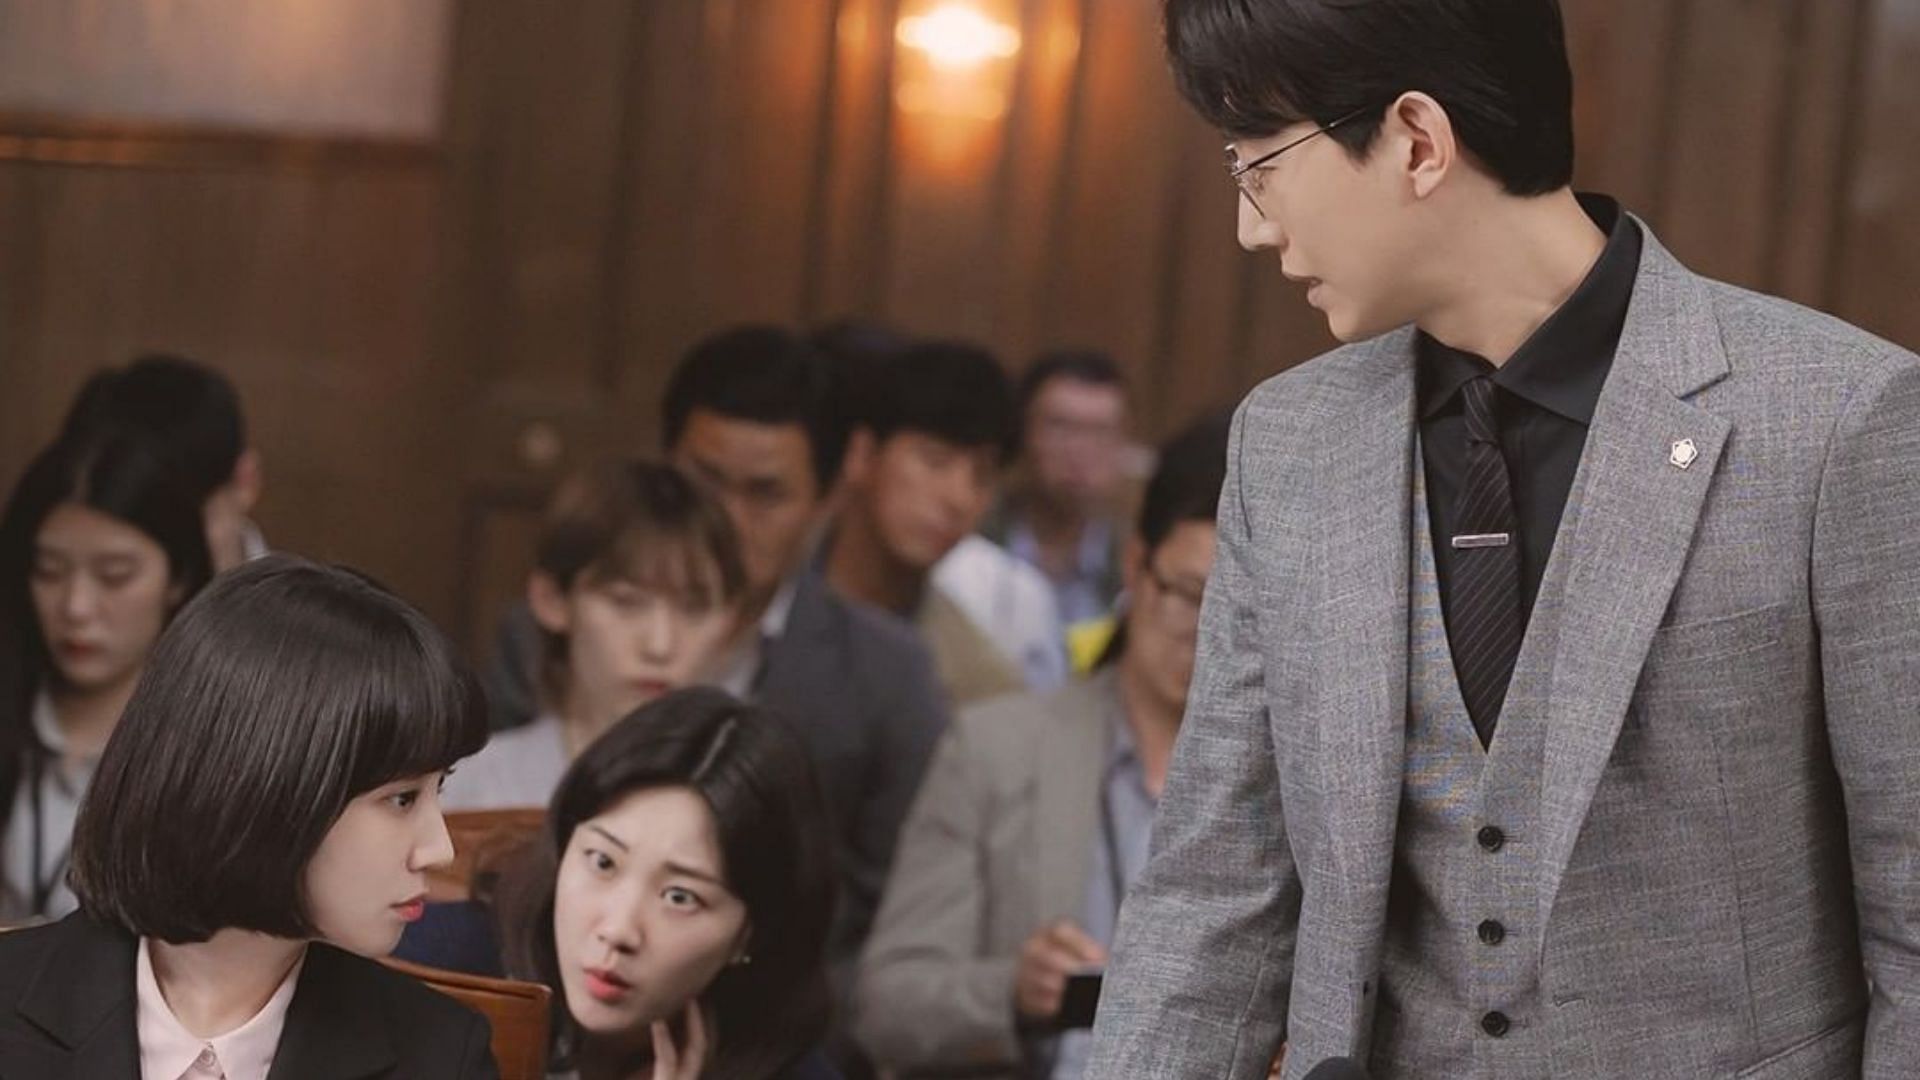 A still of actor Kang Ki-young in the Netflix show (Image via Chanel.Ena.d/Instagram)